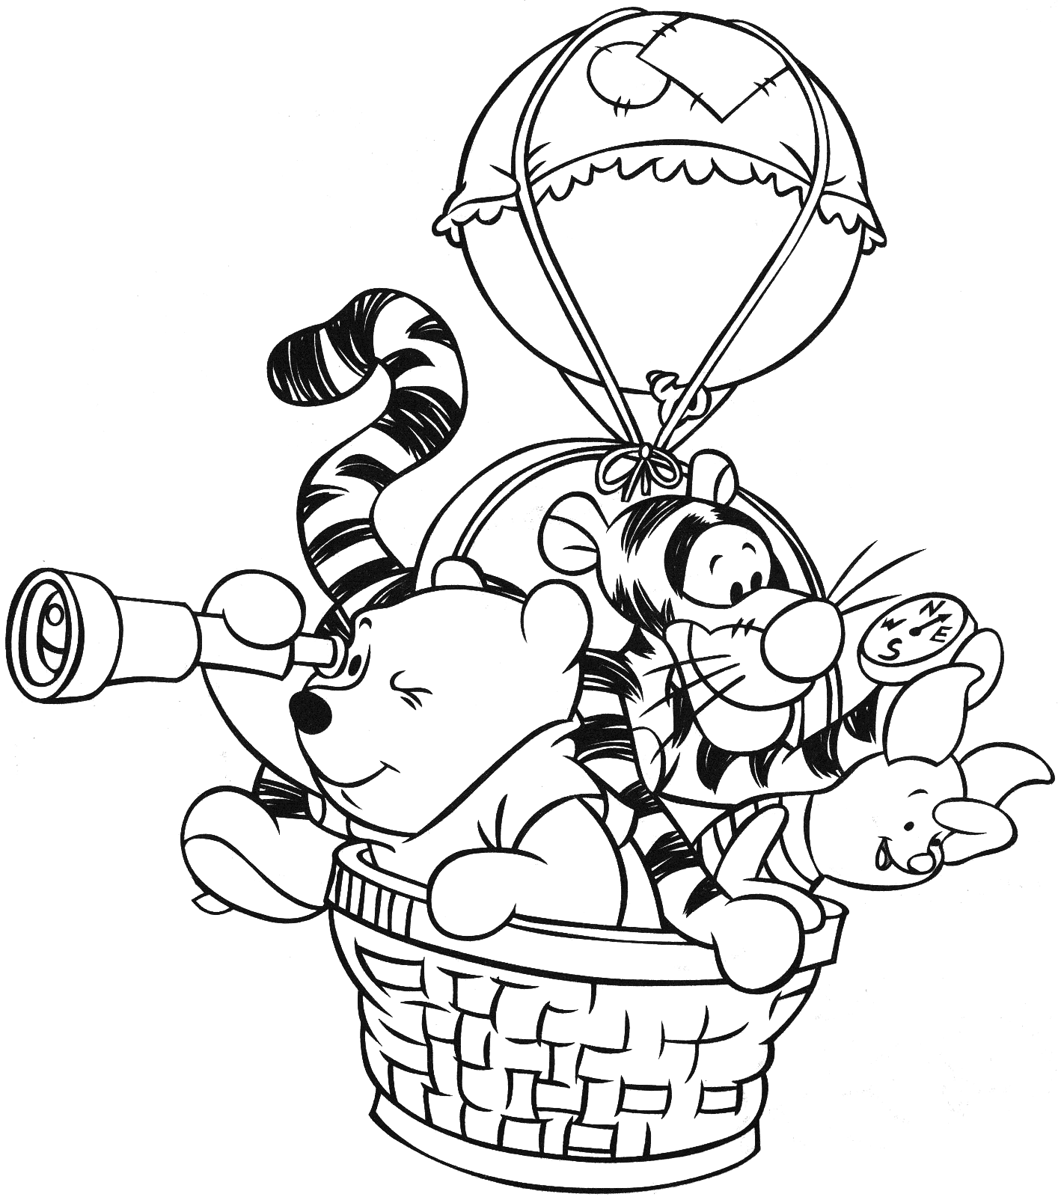 Pooh Pretending In Hot Air Balloon Coloring Page